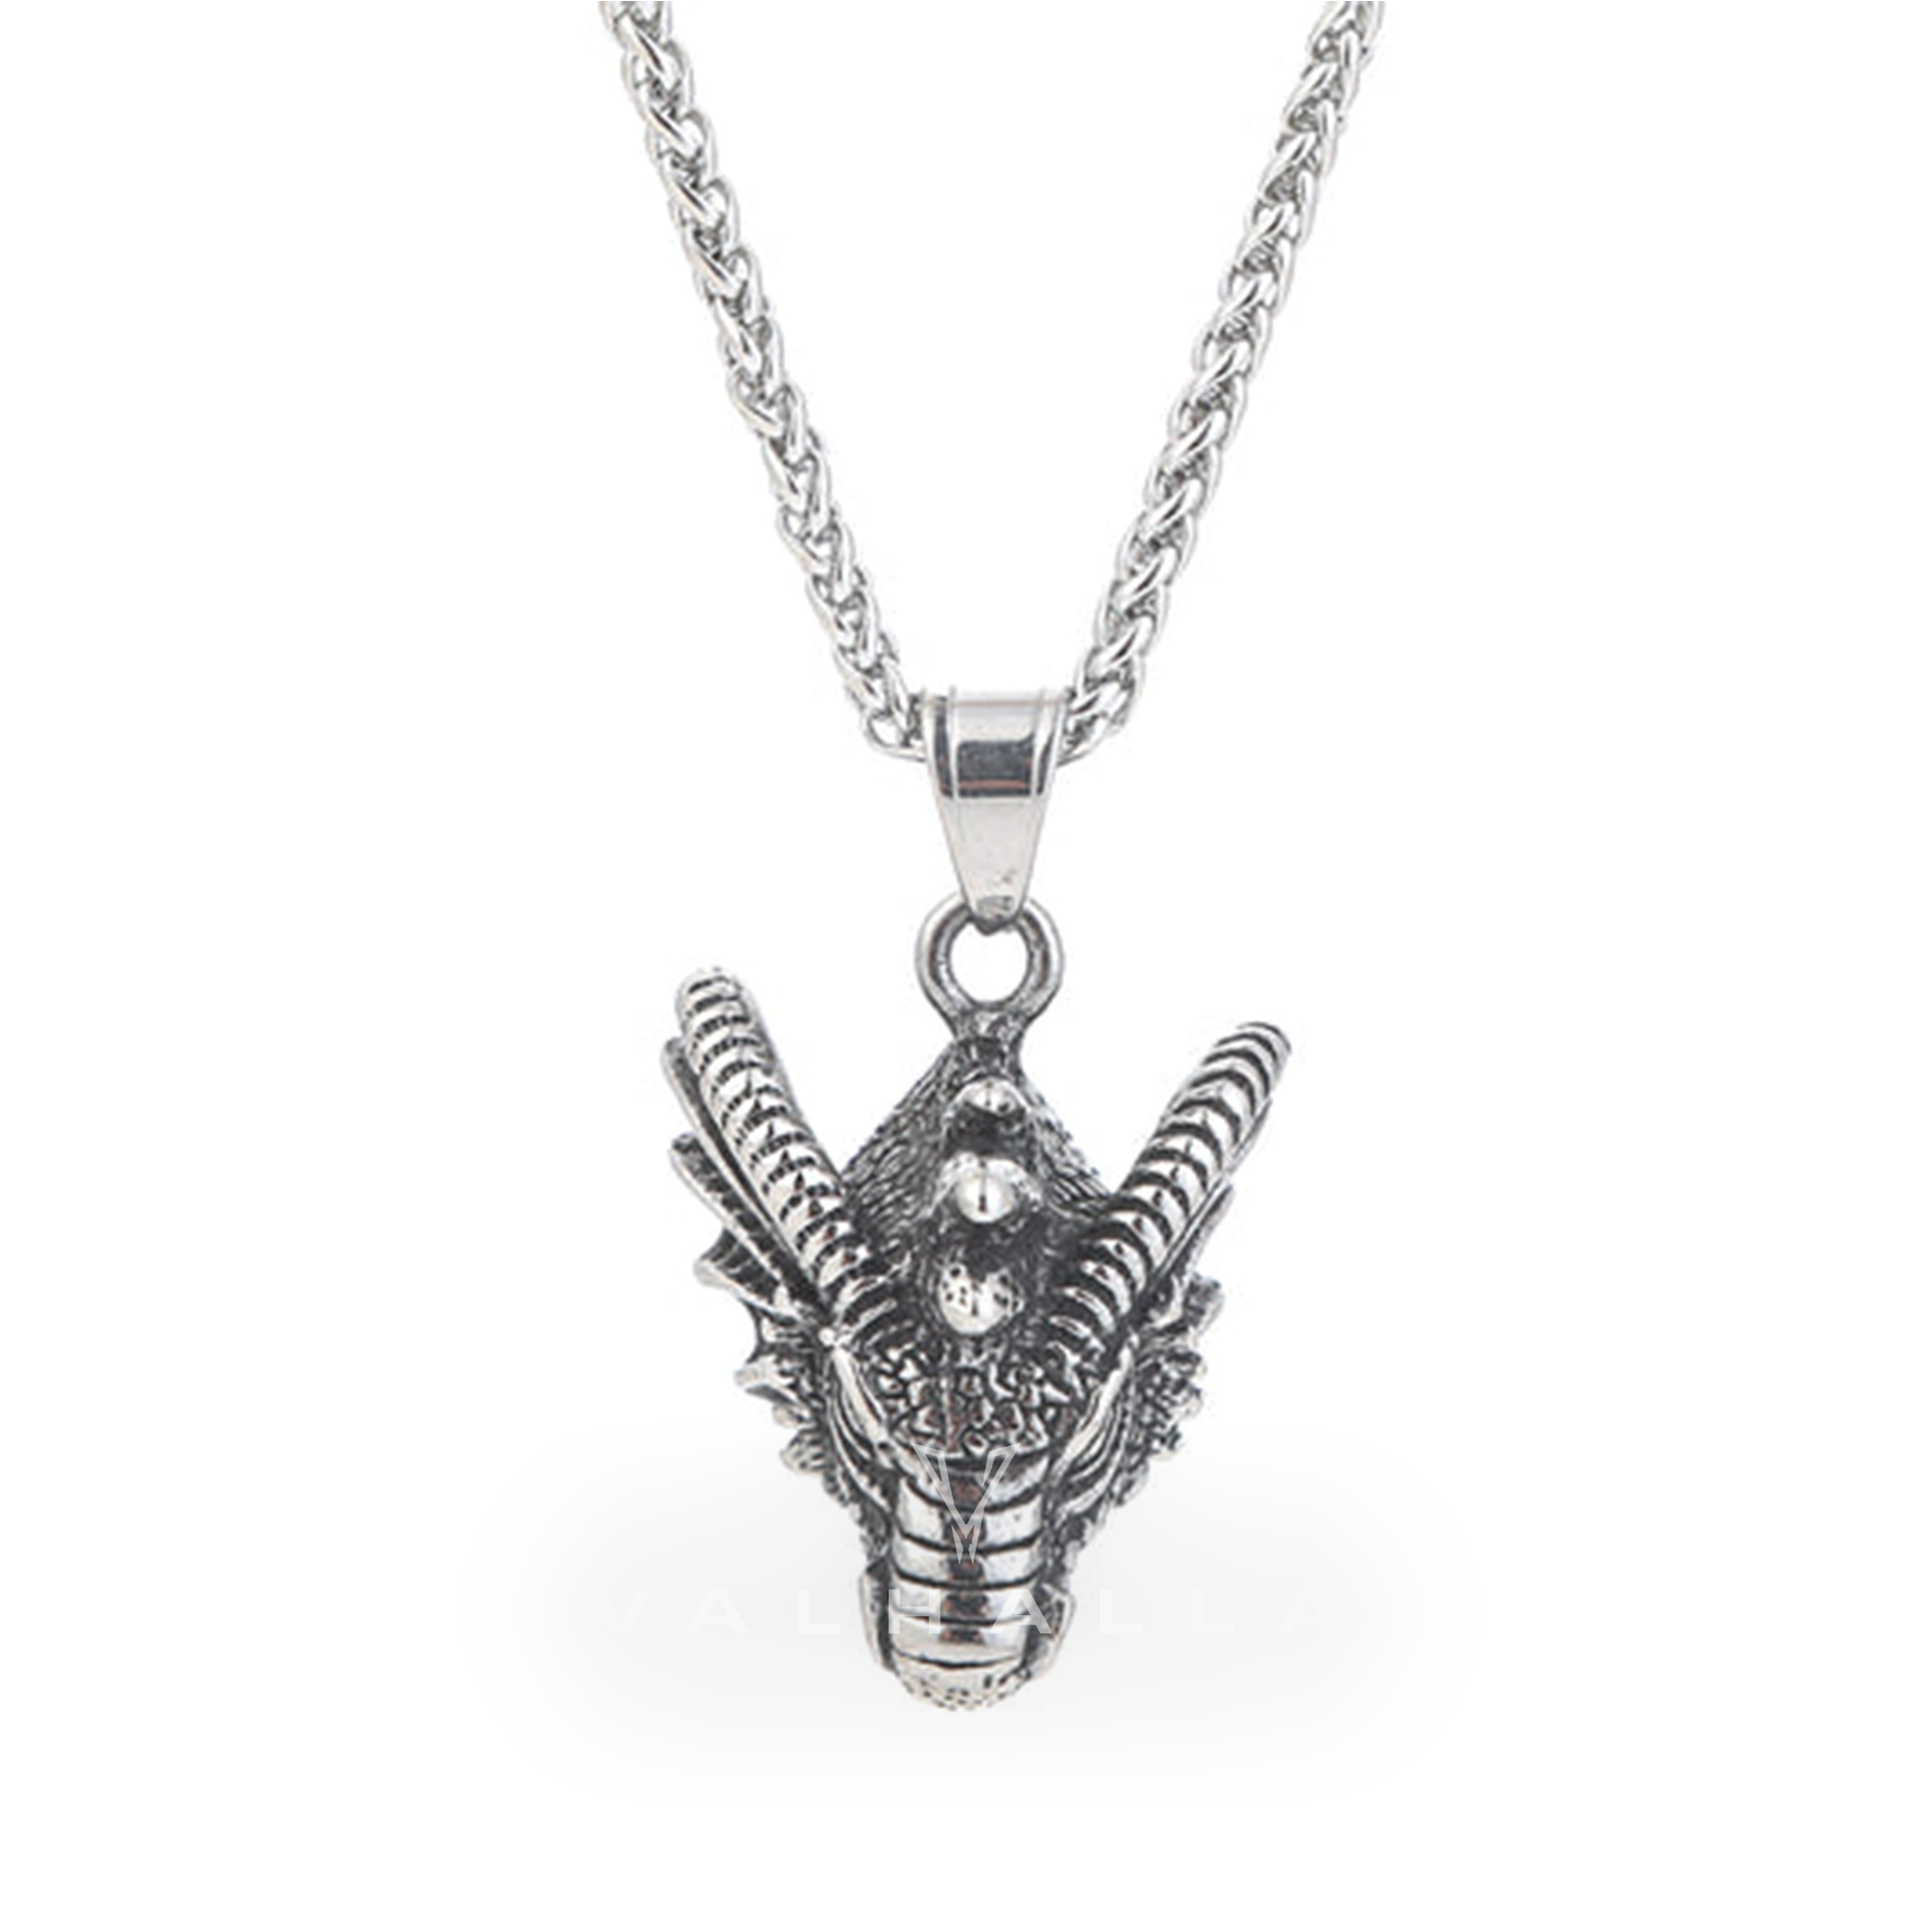 Handcrafted Stainless Steel Dragon Head Necklace